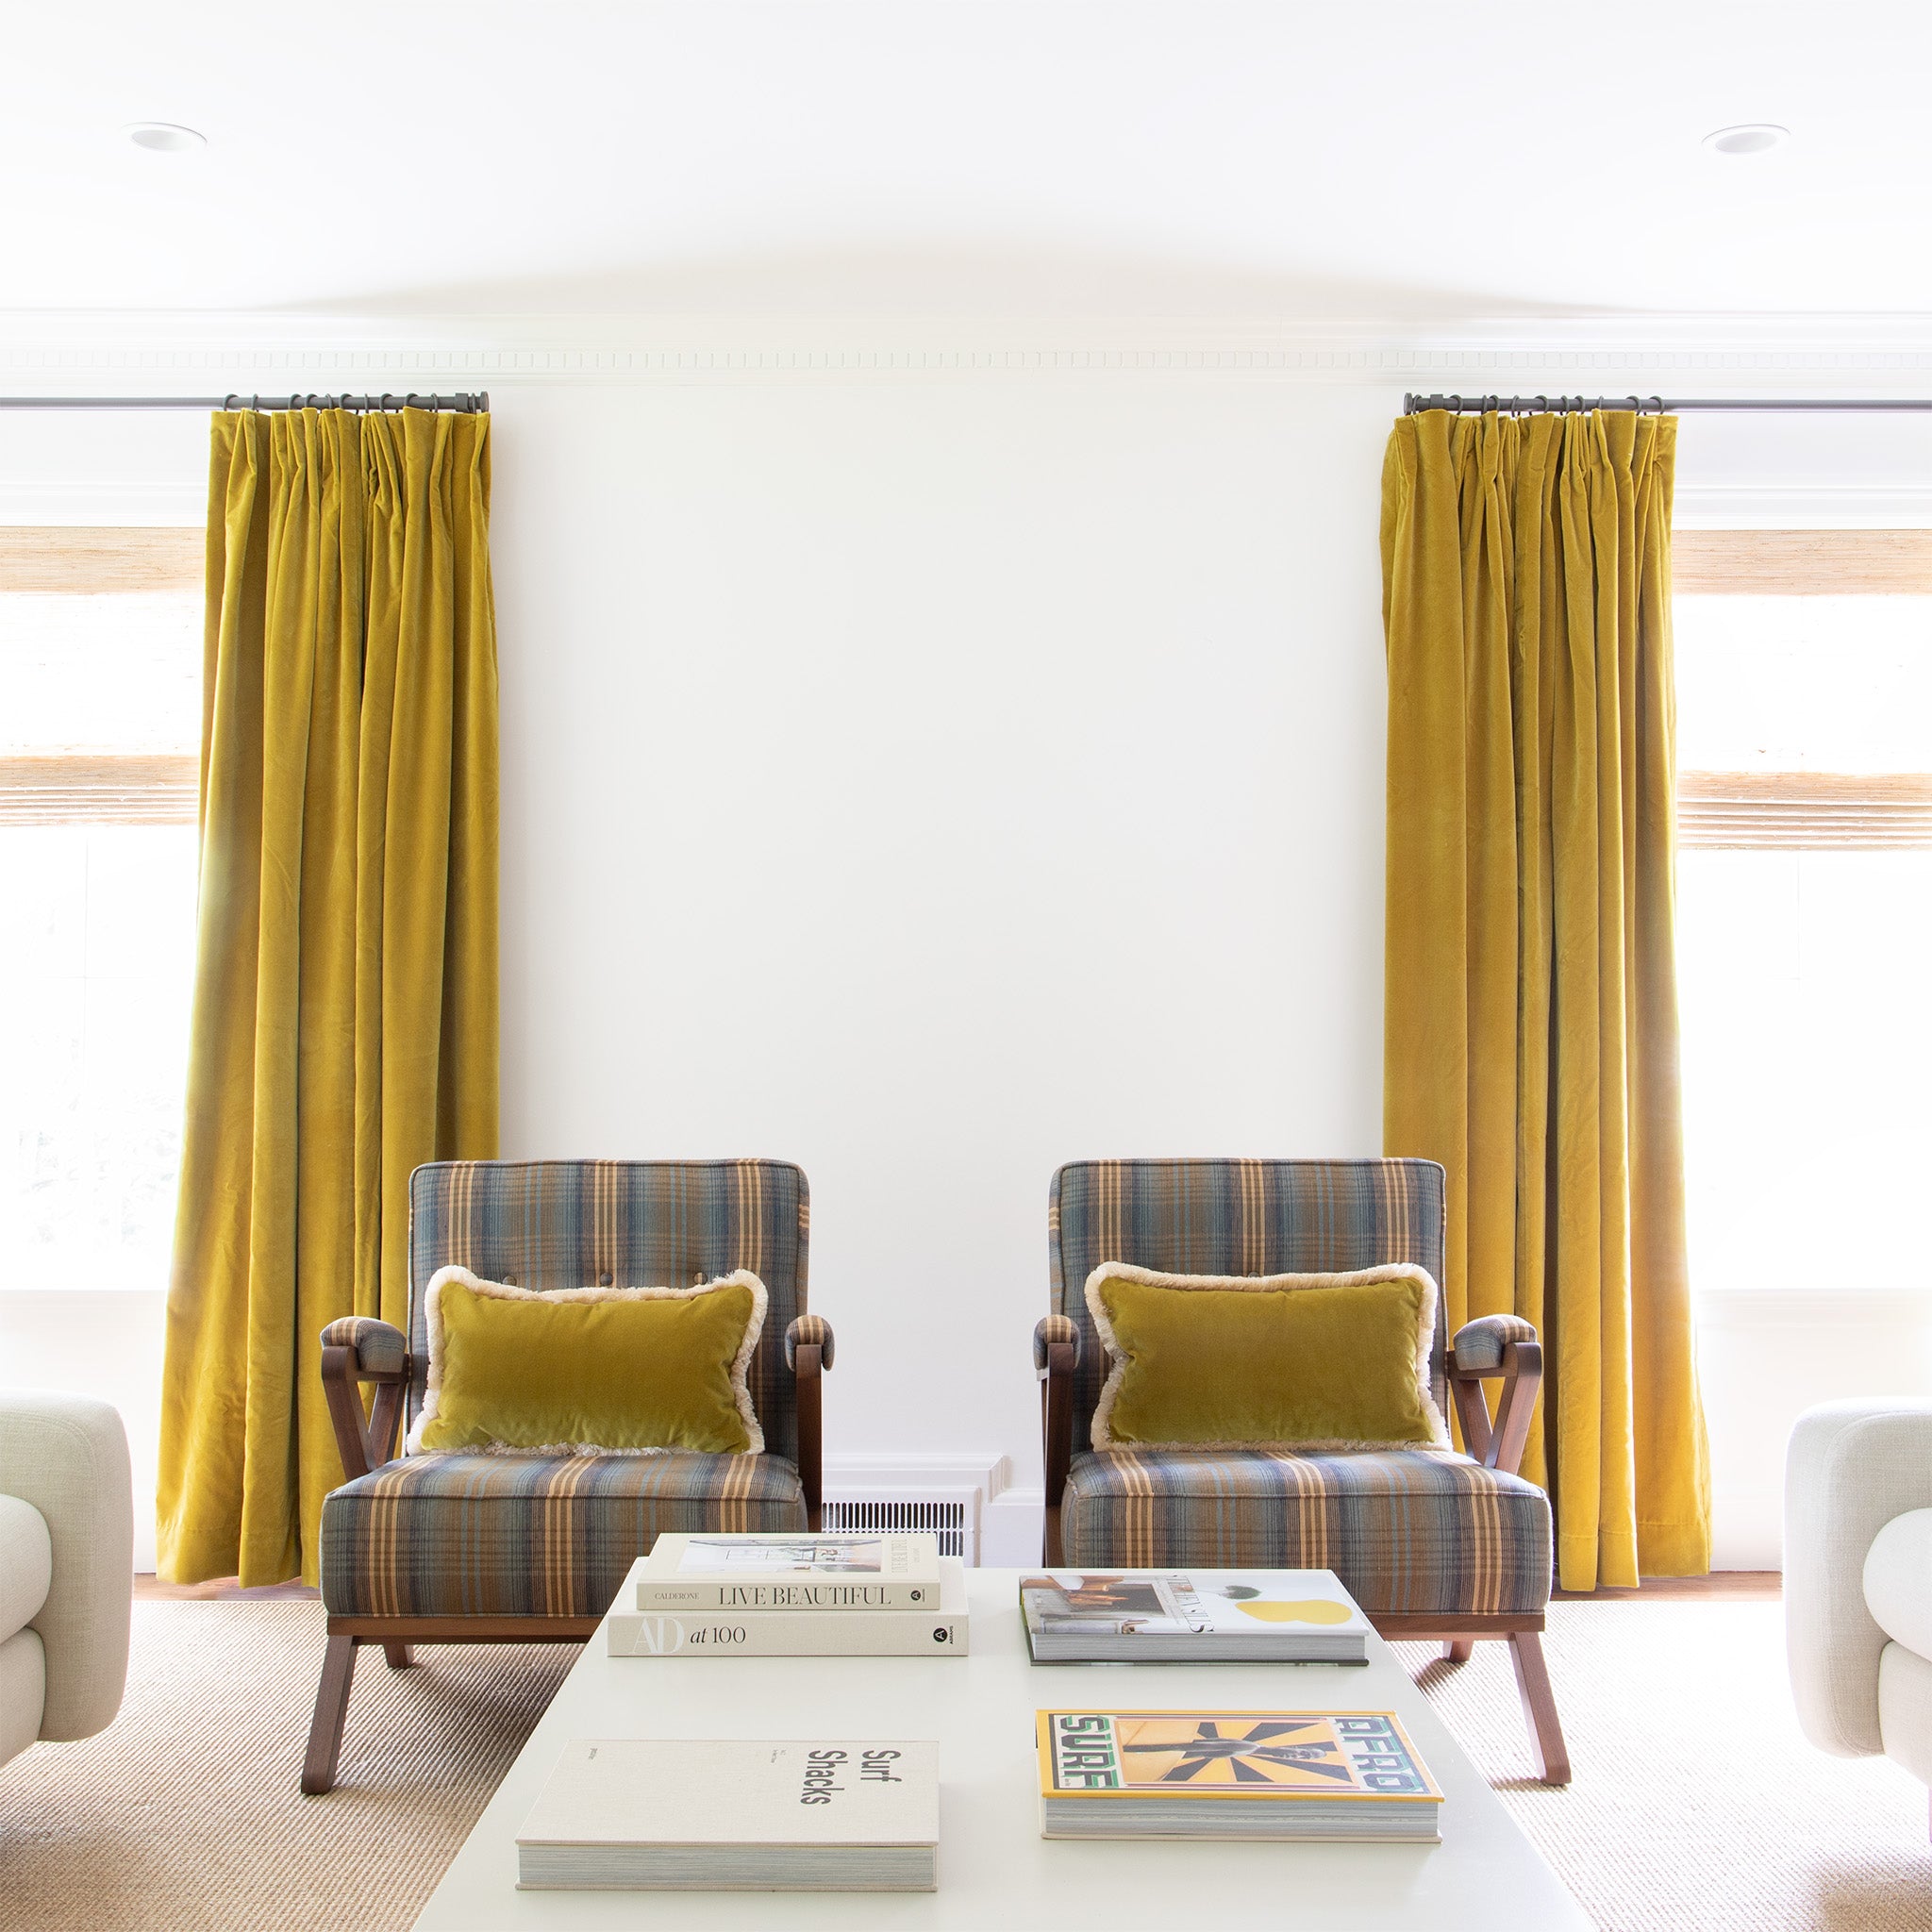 golden chartreuse curtains in front of illuminated window in a living room with blue and yellow striped chairs with golden chartreuse pillows on them